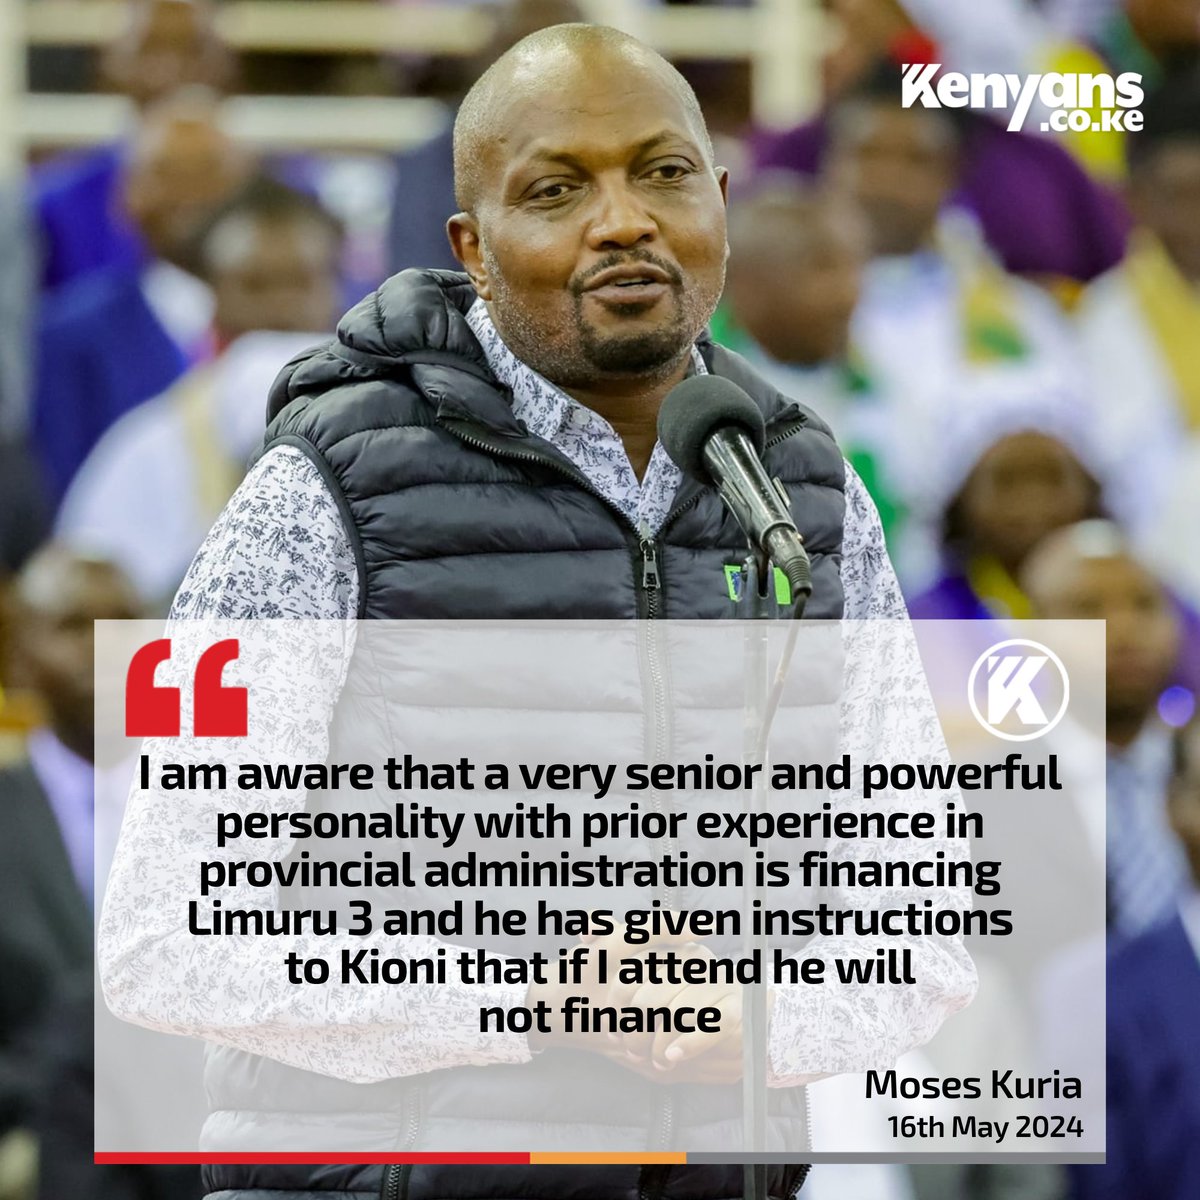 I am aware that a very senior and powerful personality with prior experience in provincial administration is financing Limuru 3 - Moses Kuria